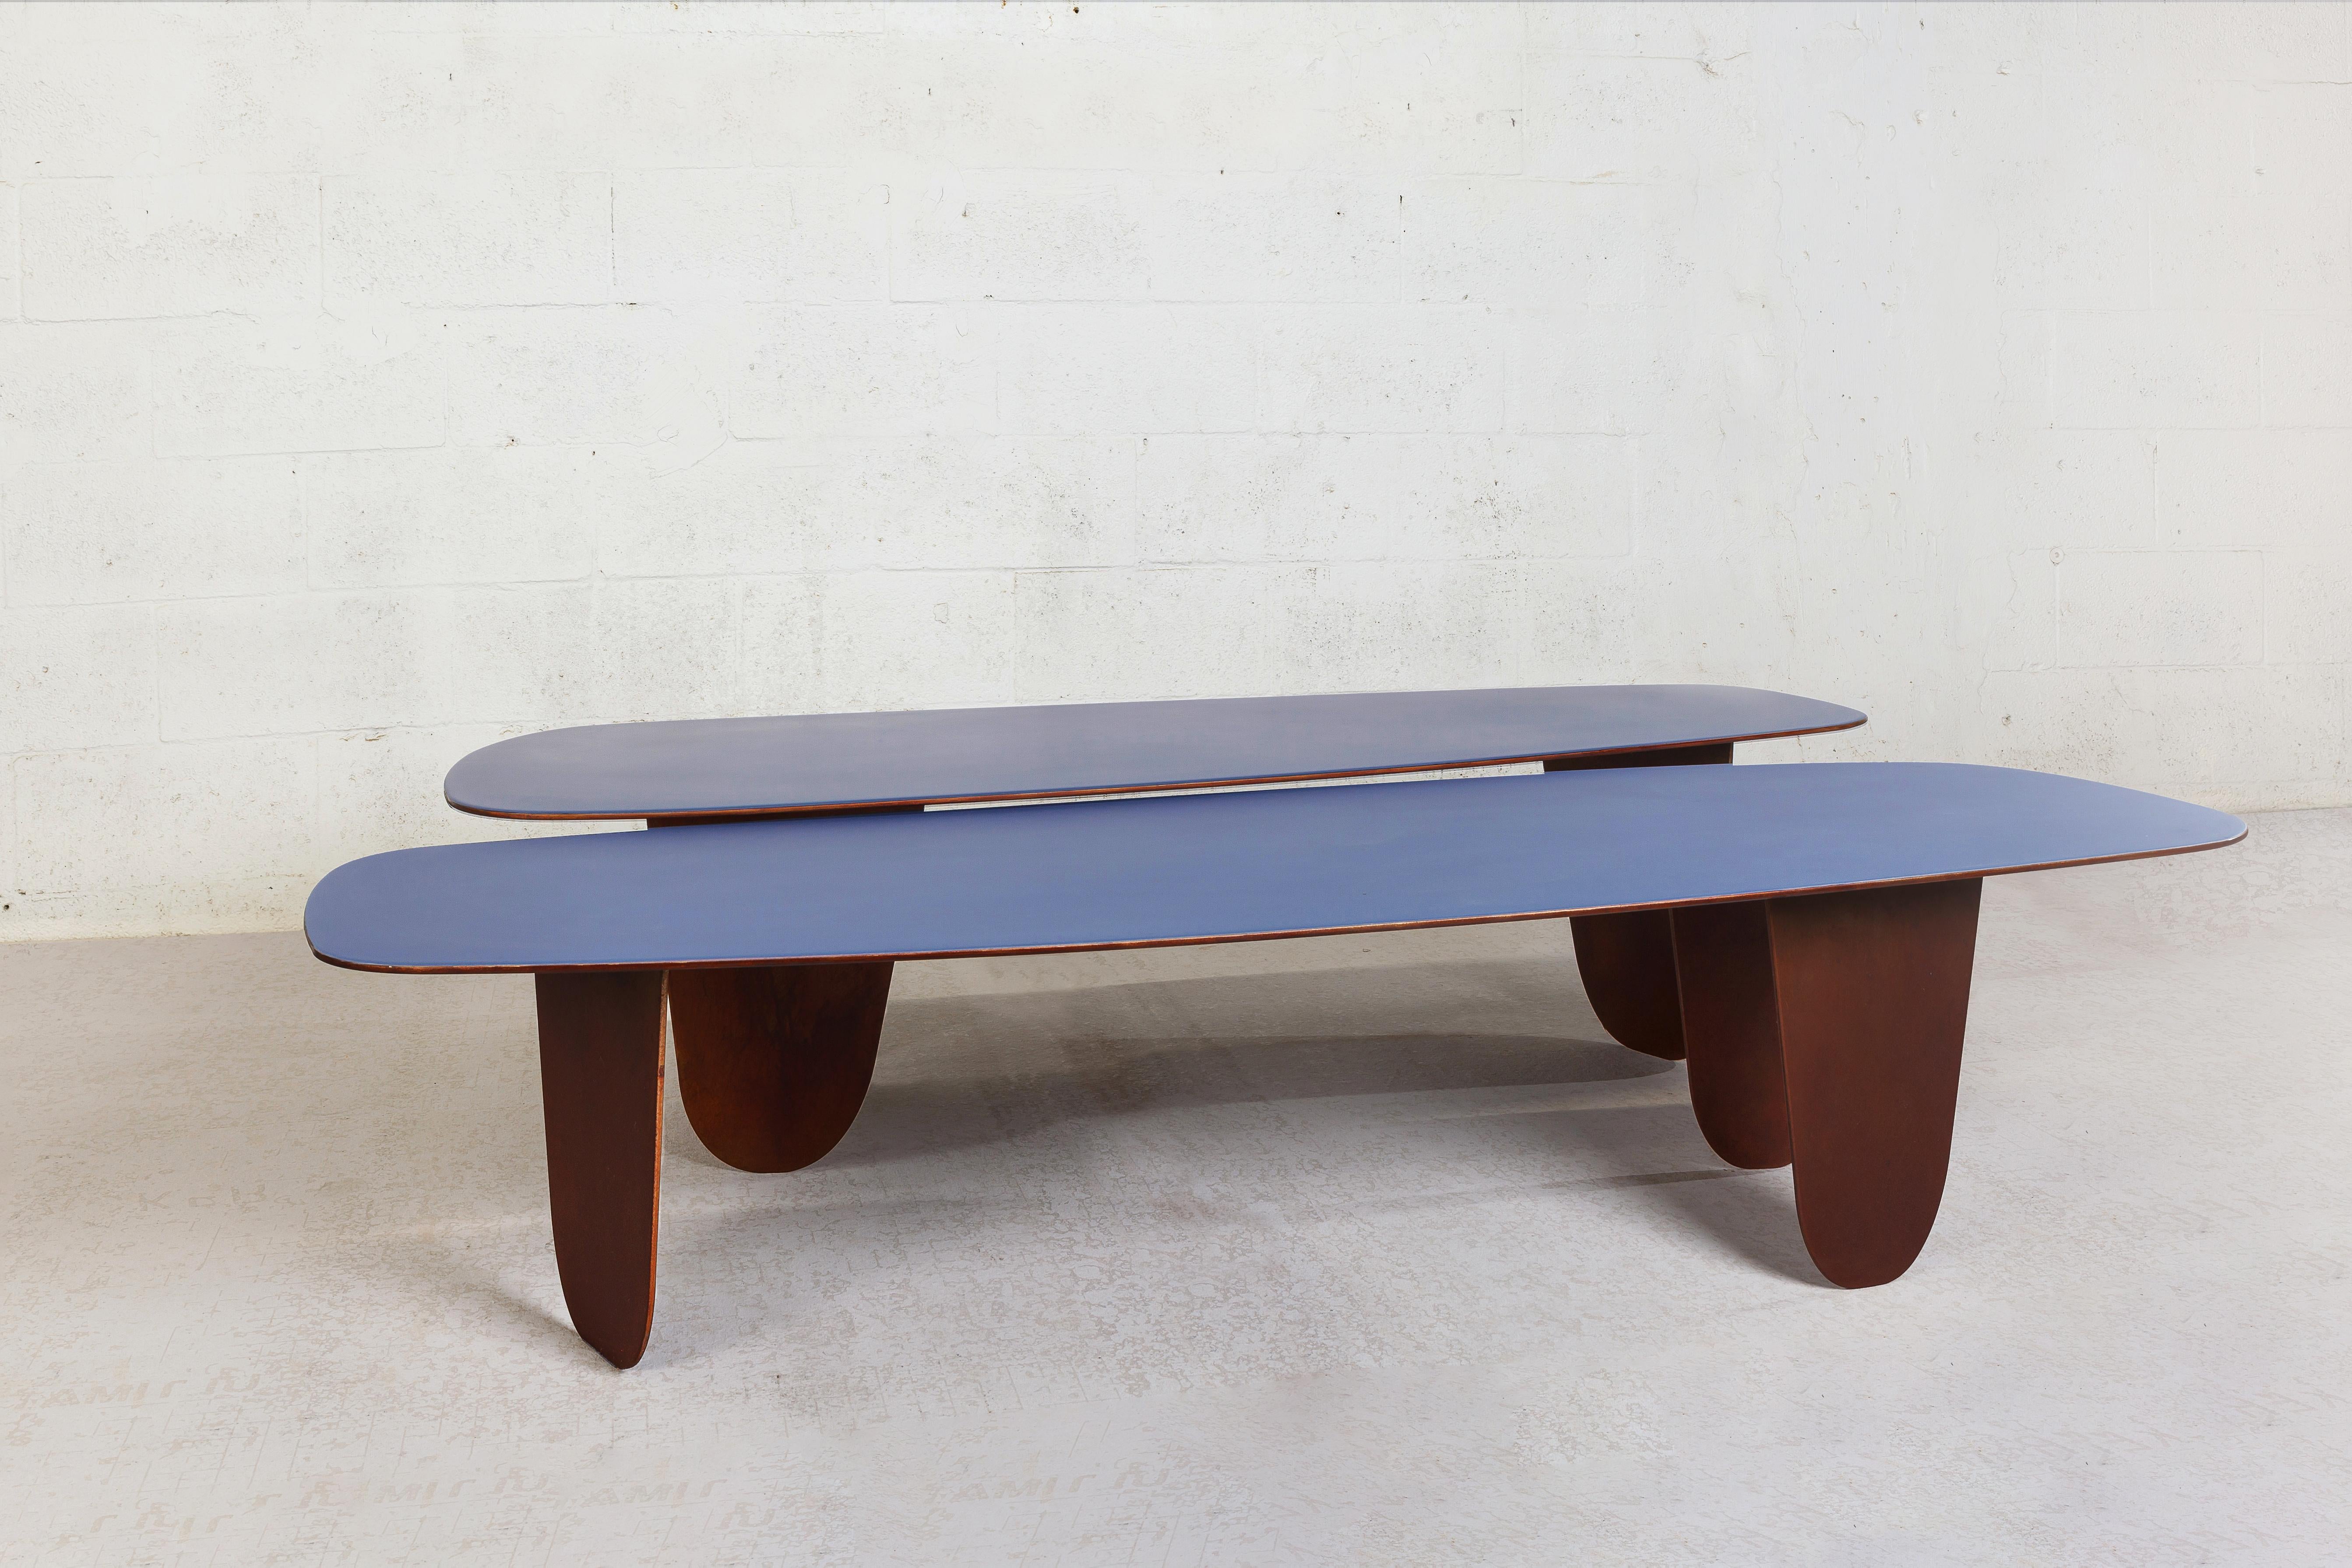 The Osaka tables draws inspiration from the Japanese philosophy of organic minimalism to create simplicity, harmony, and beauty in everyday objects. The table is crafted of steel and finished in a rich brown patina that gives the piece a sense of